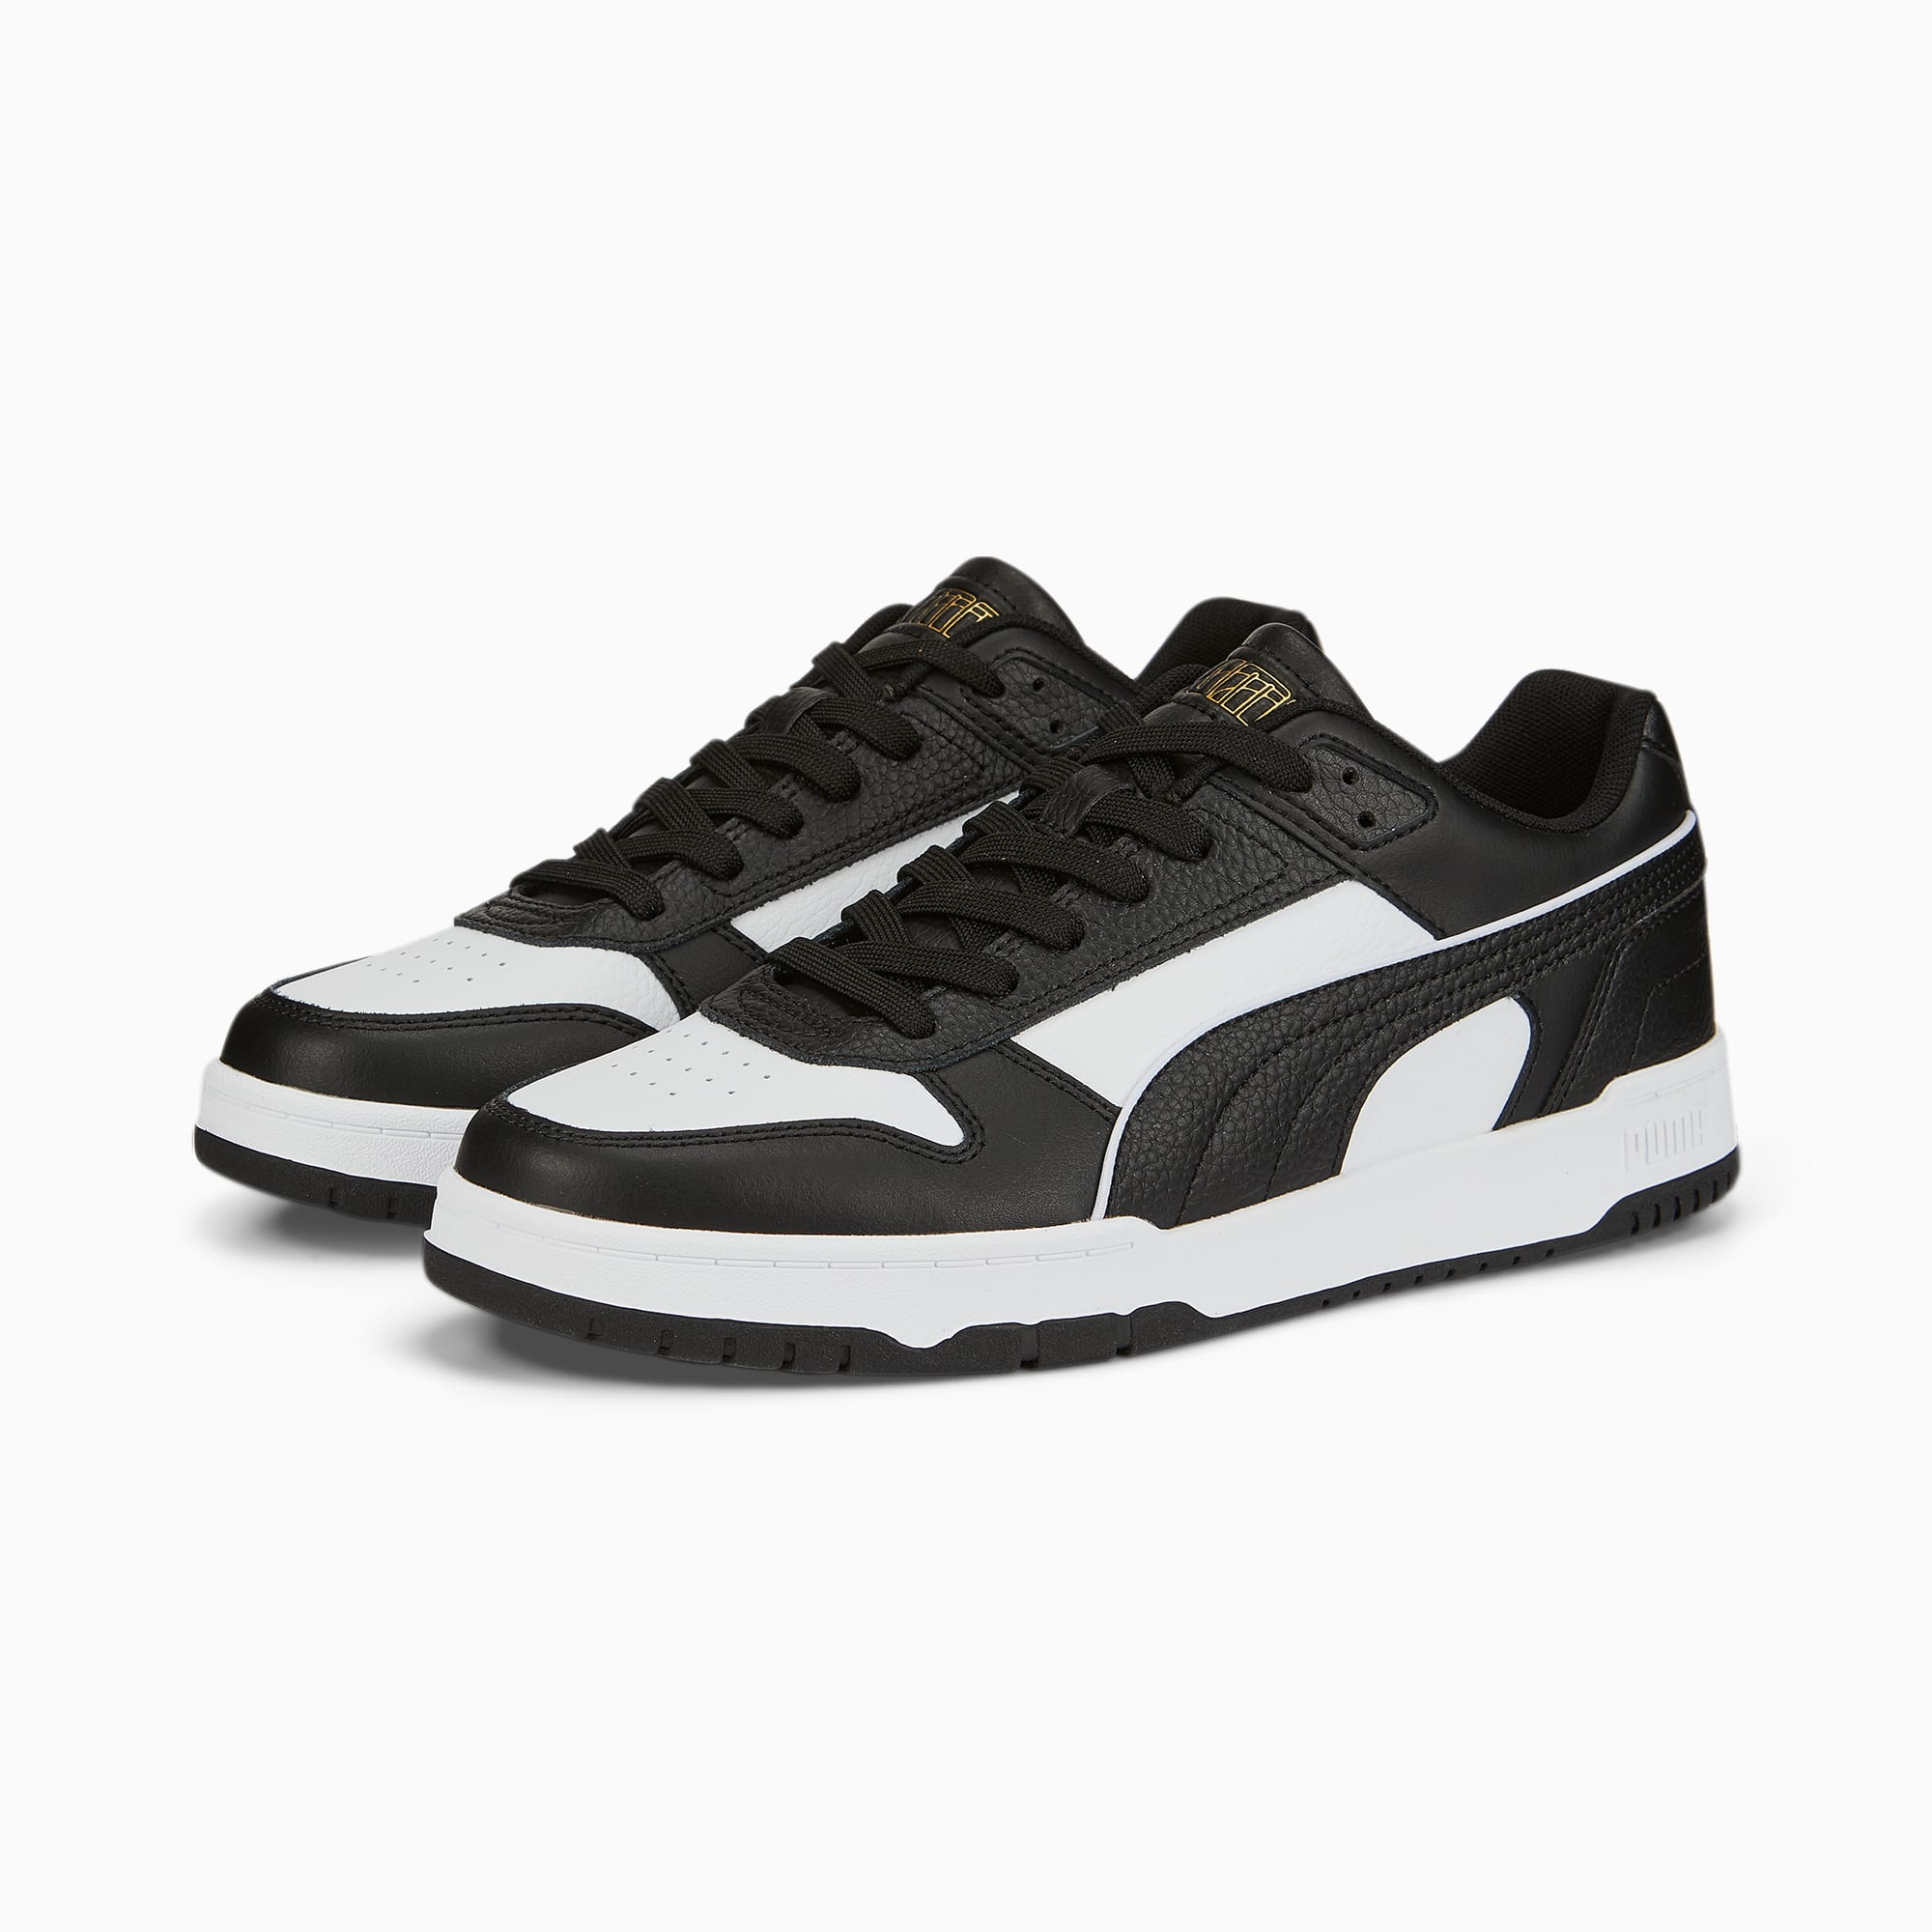 Women's PUMA Rbd Game Low Sneakers, Black/White/Gold, Size 35,5, Shoes